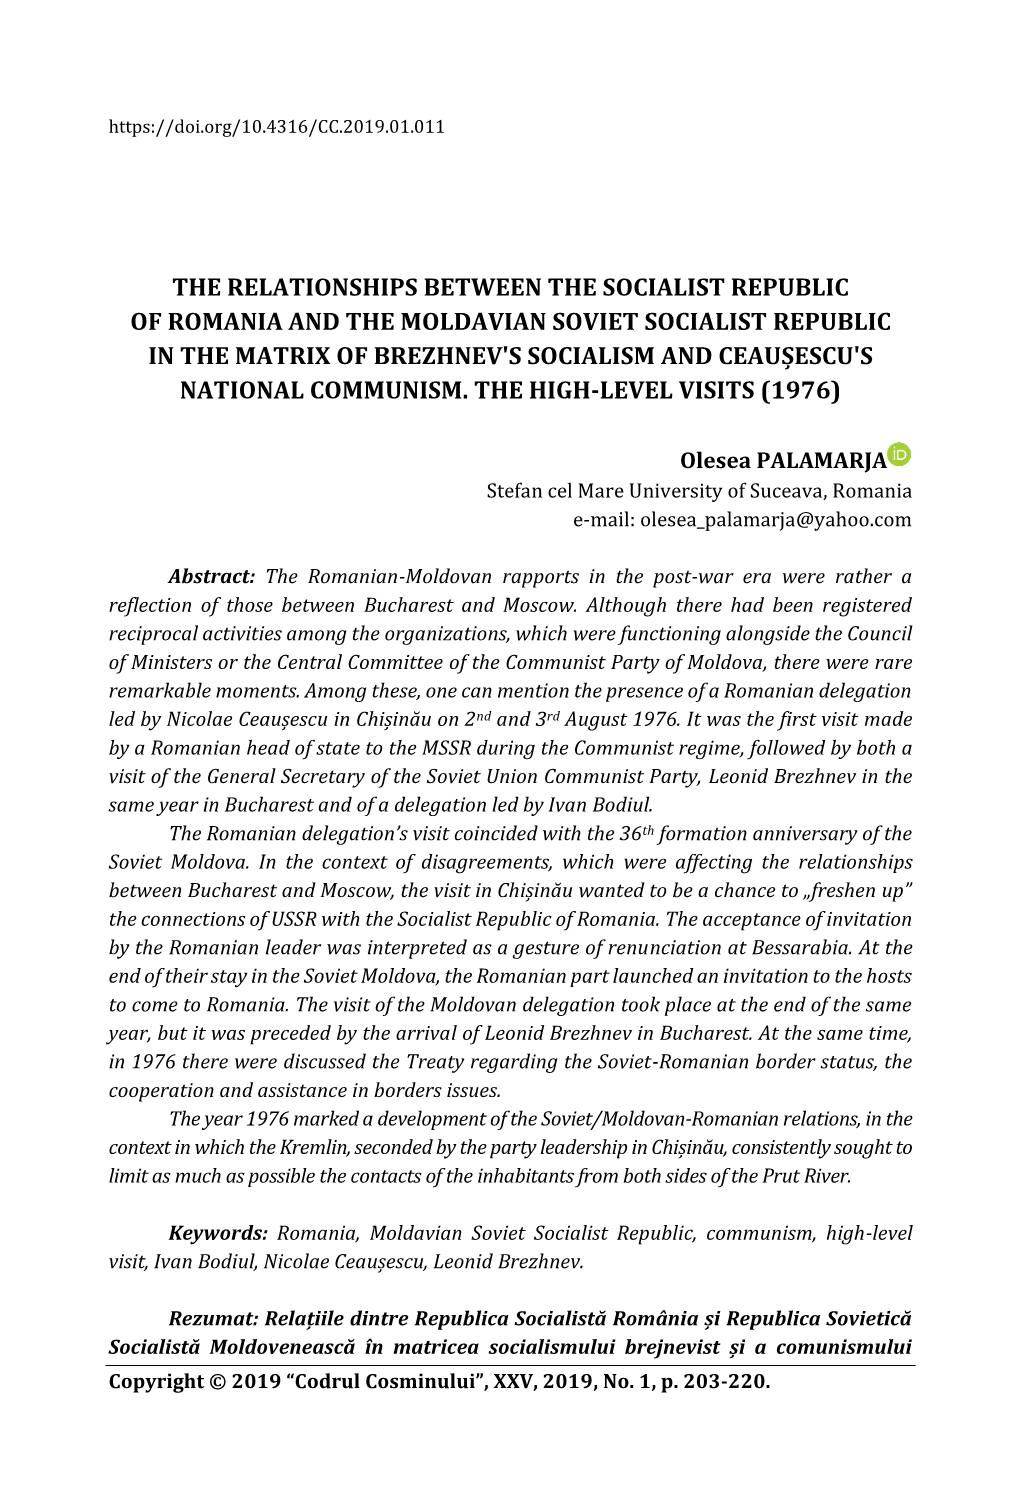 The Relationships Between the Socialist Republic of Romania And